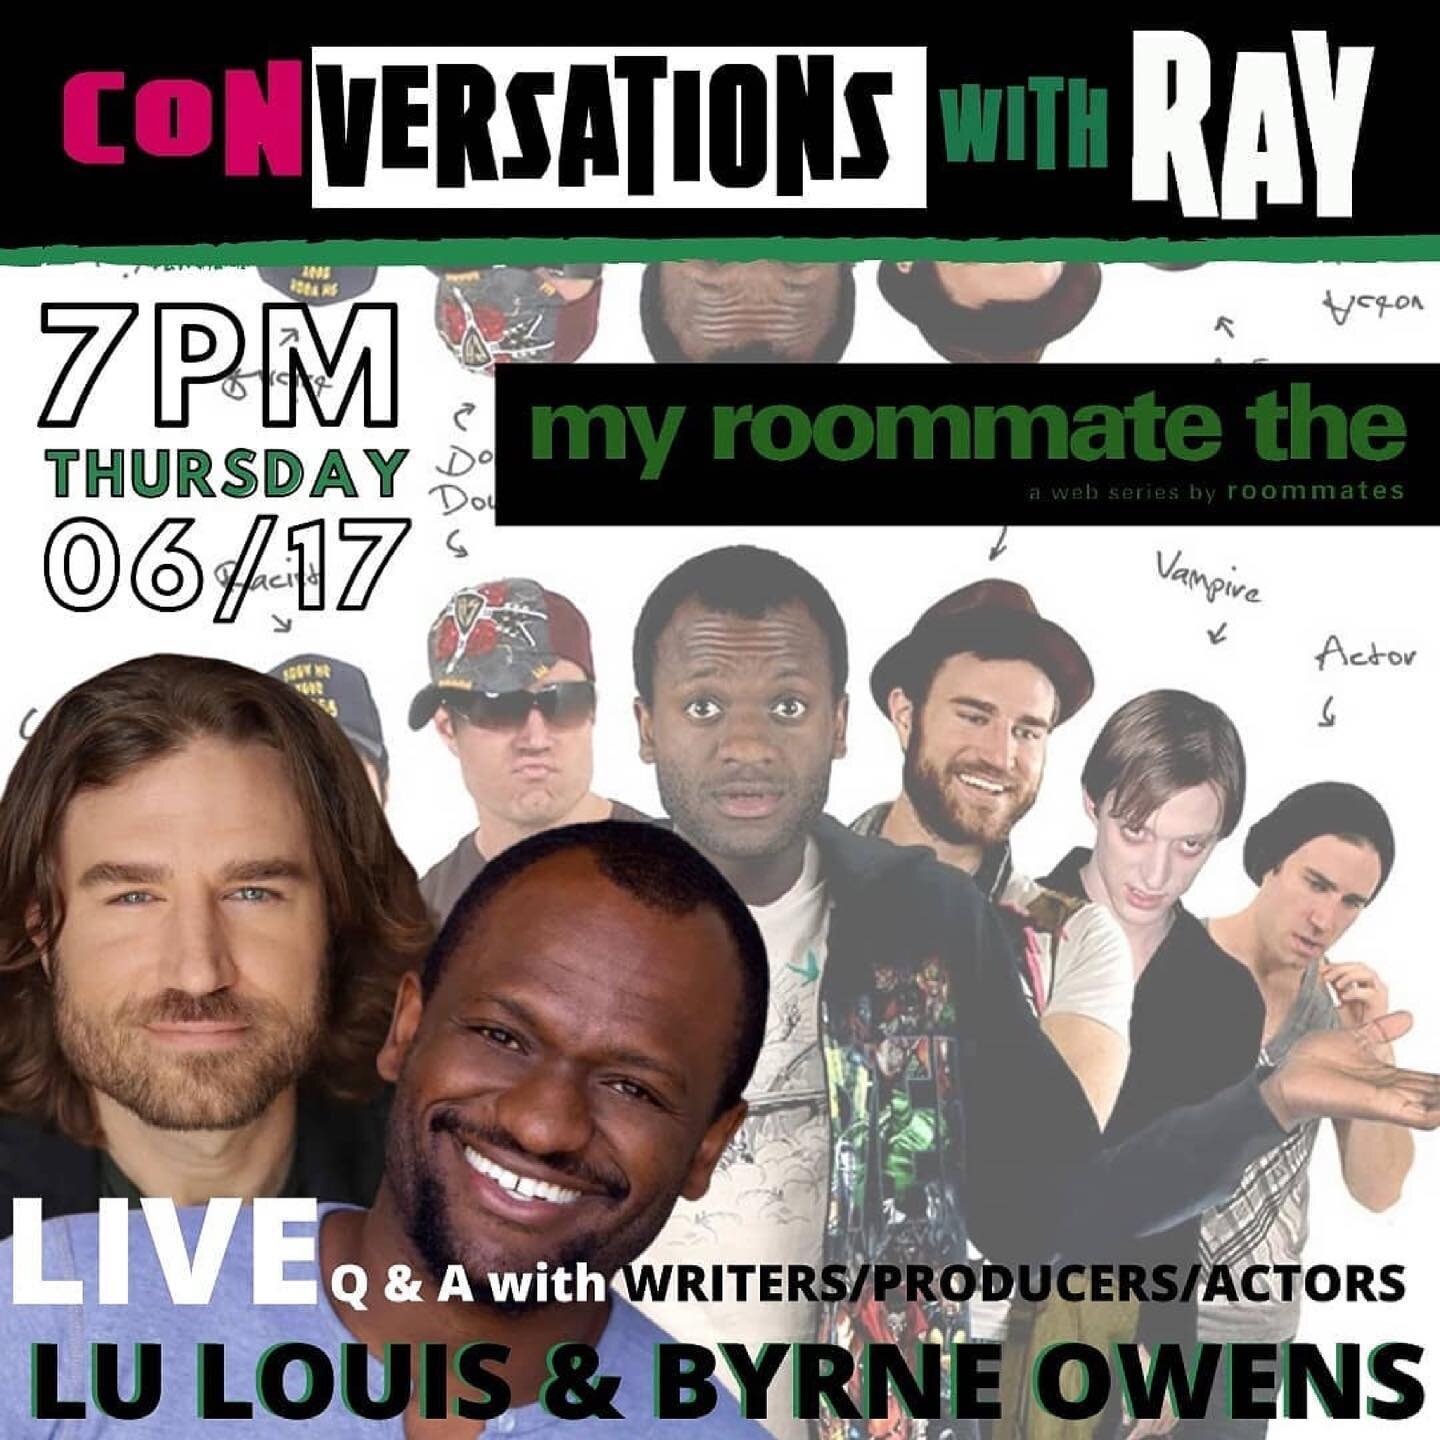 #Repost @thehellmouthcon
・・・
Join our host @aunttessycosplay THIS Thursday as he interviews the Creators of @myroommatethe

Byrne Owens and Lu Louis wrote, directed, and starred in the wildly popular television series My Roommate the.. This comedy se